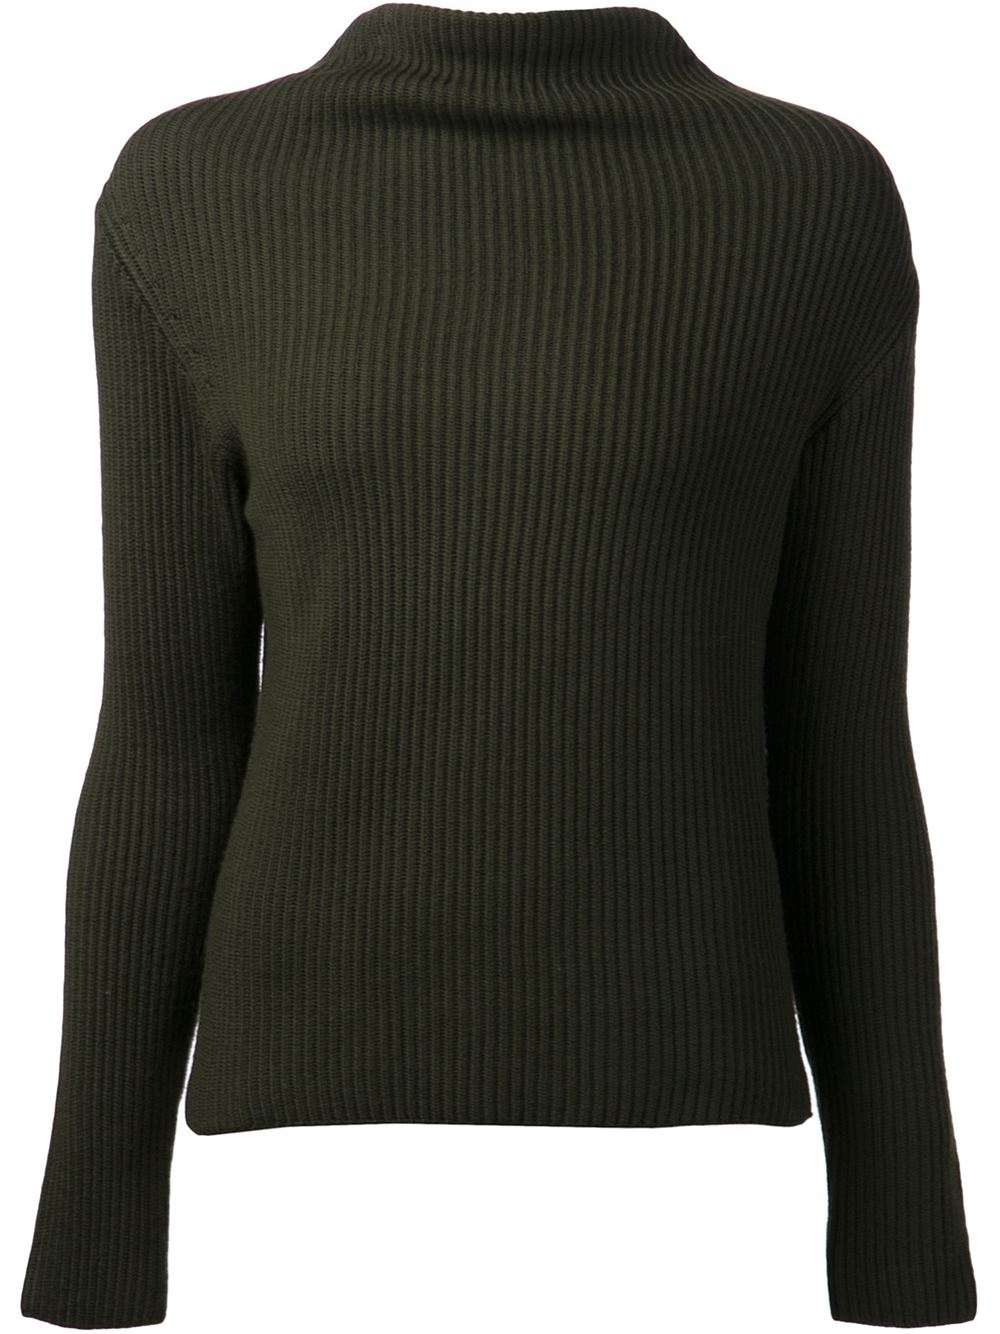 Lyst - J.w.anderson Ribbed Sweater in Green